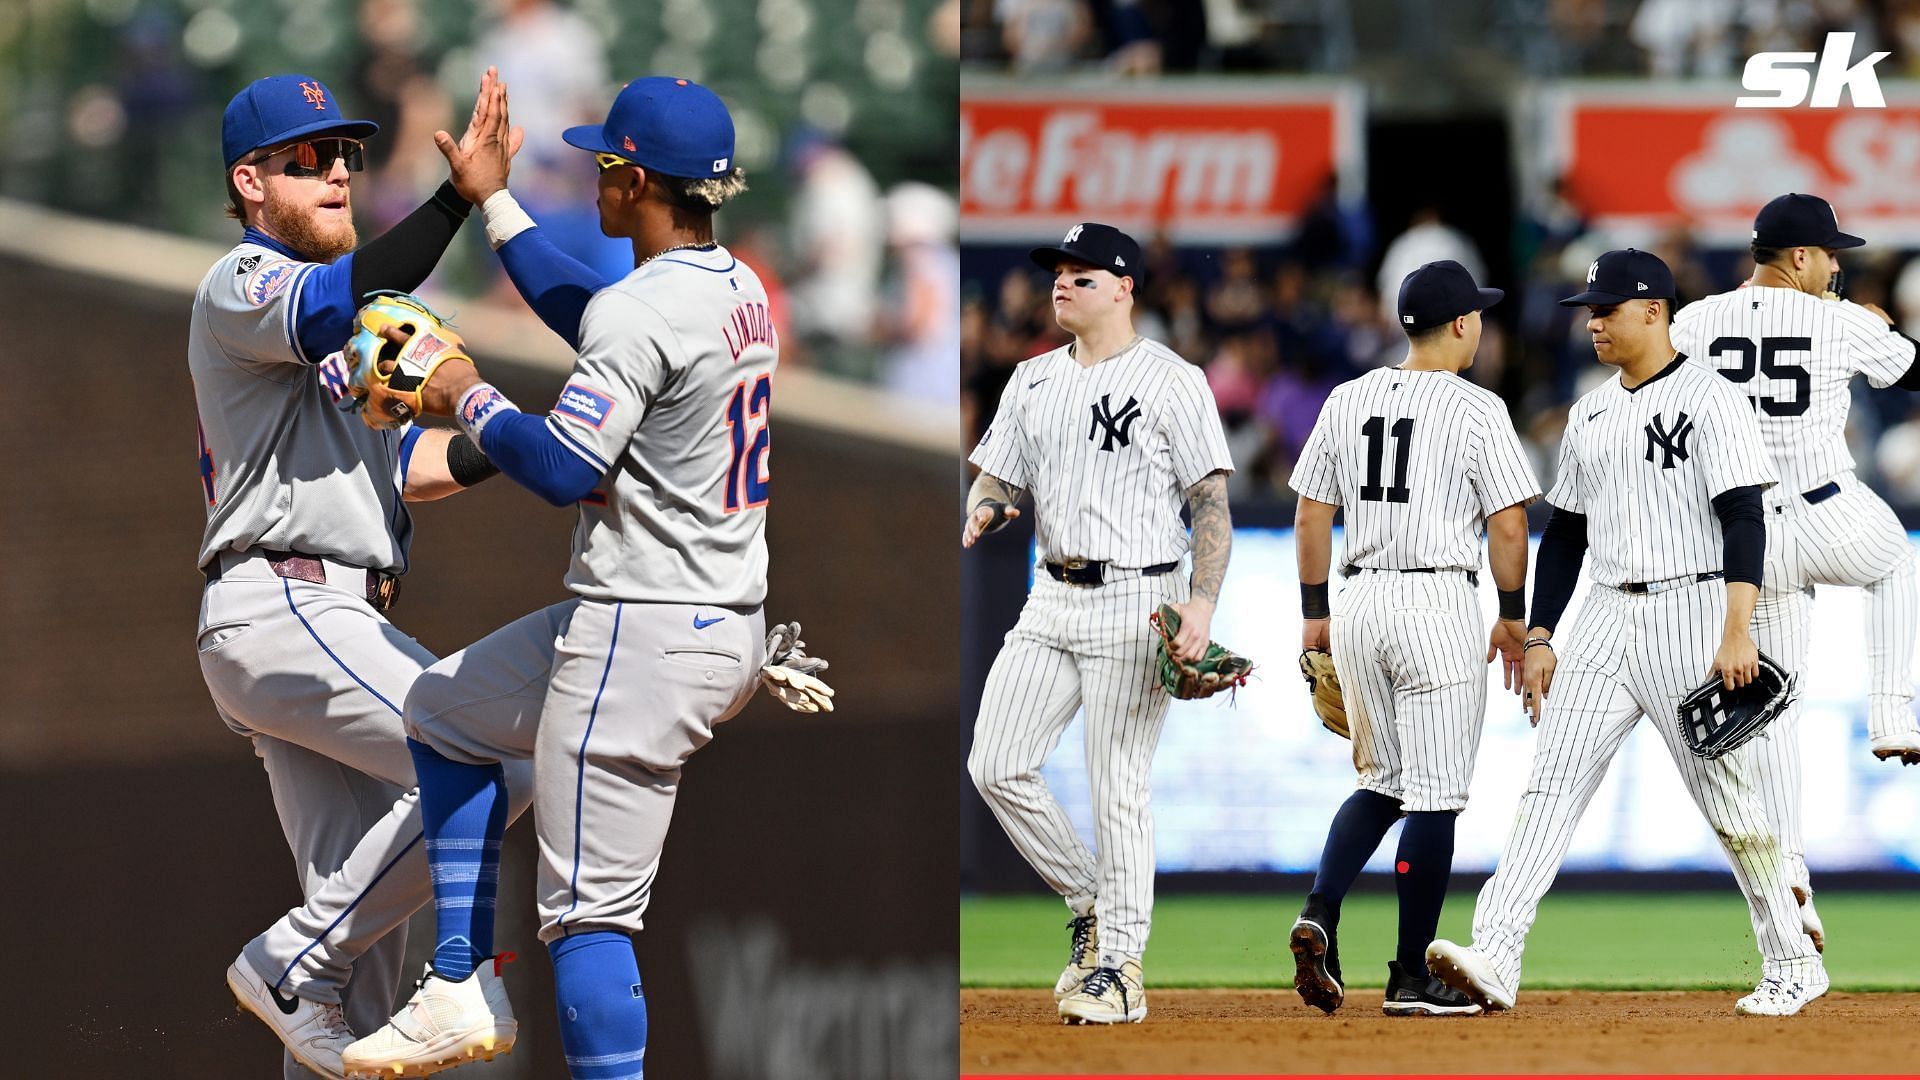 The Mets and Yankees will play the second game of the Subway Series on Wednesday